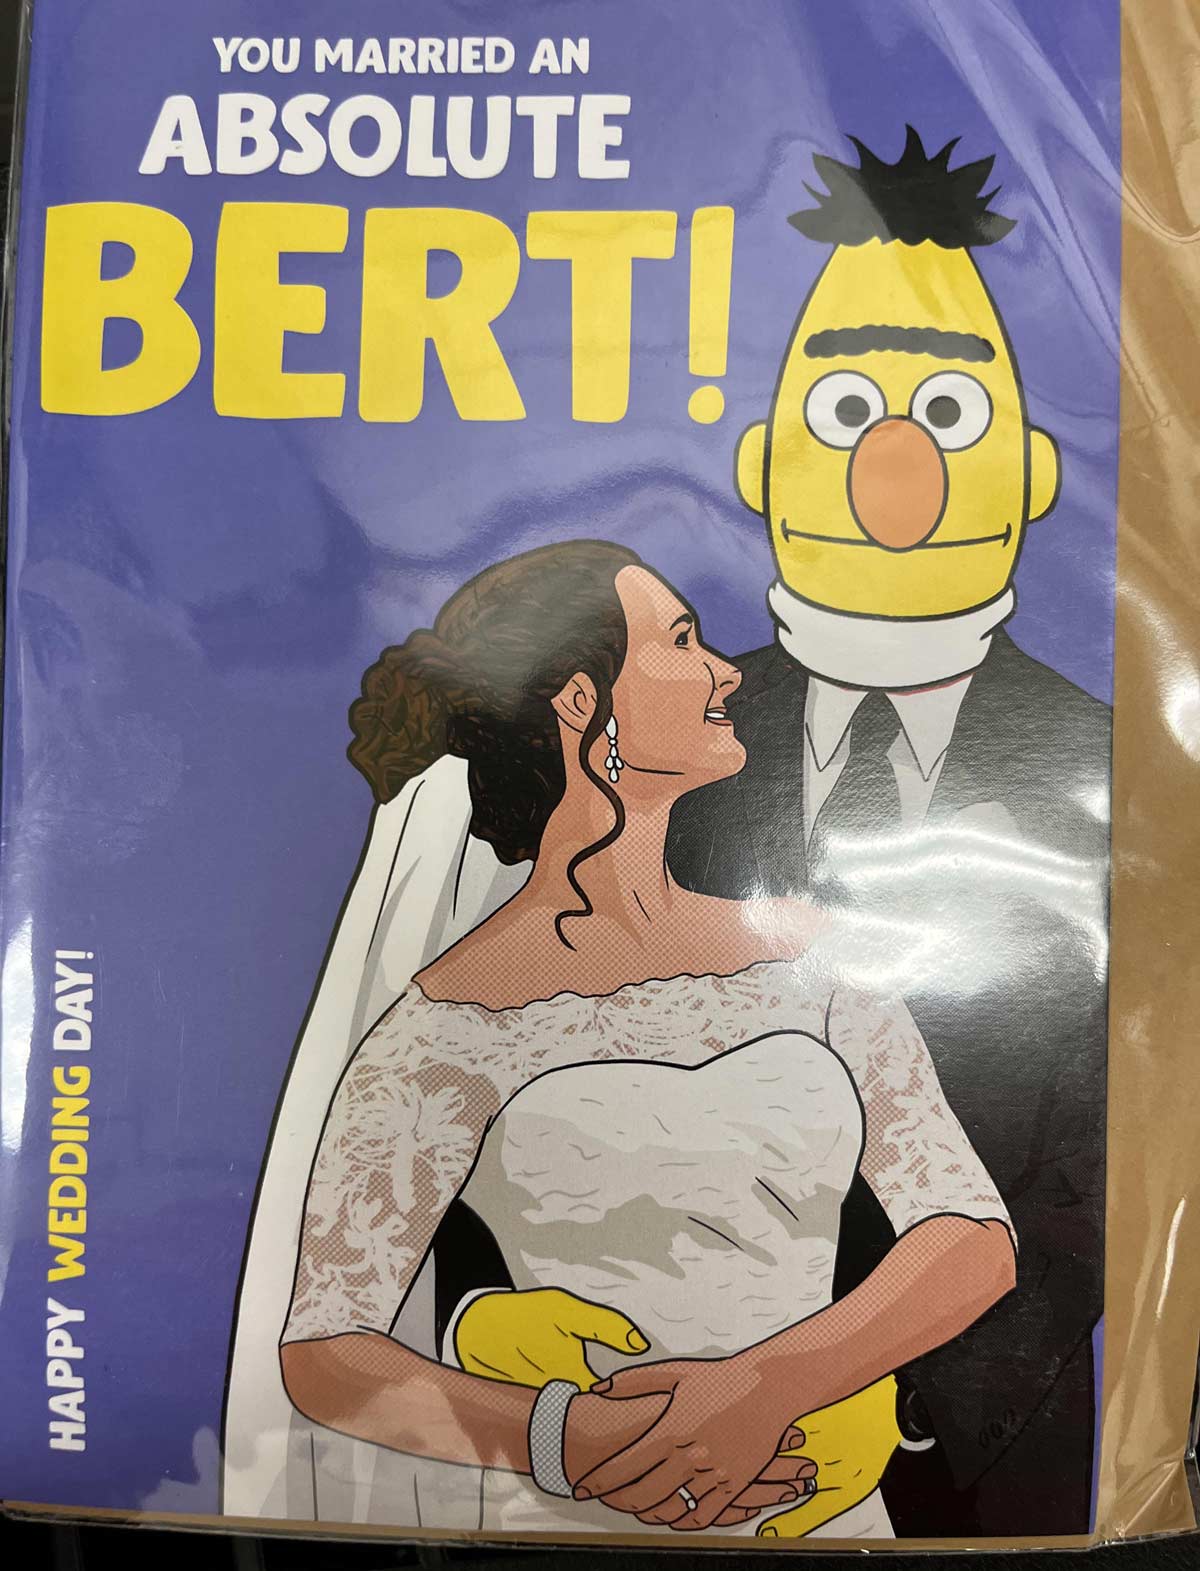 My cousin’s wedding is today, do you think he’ll like this card